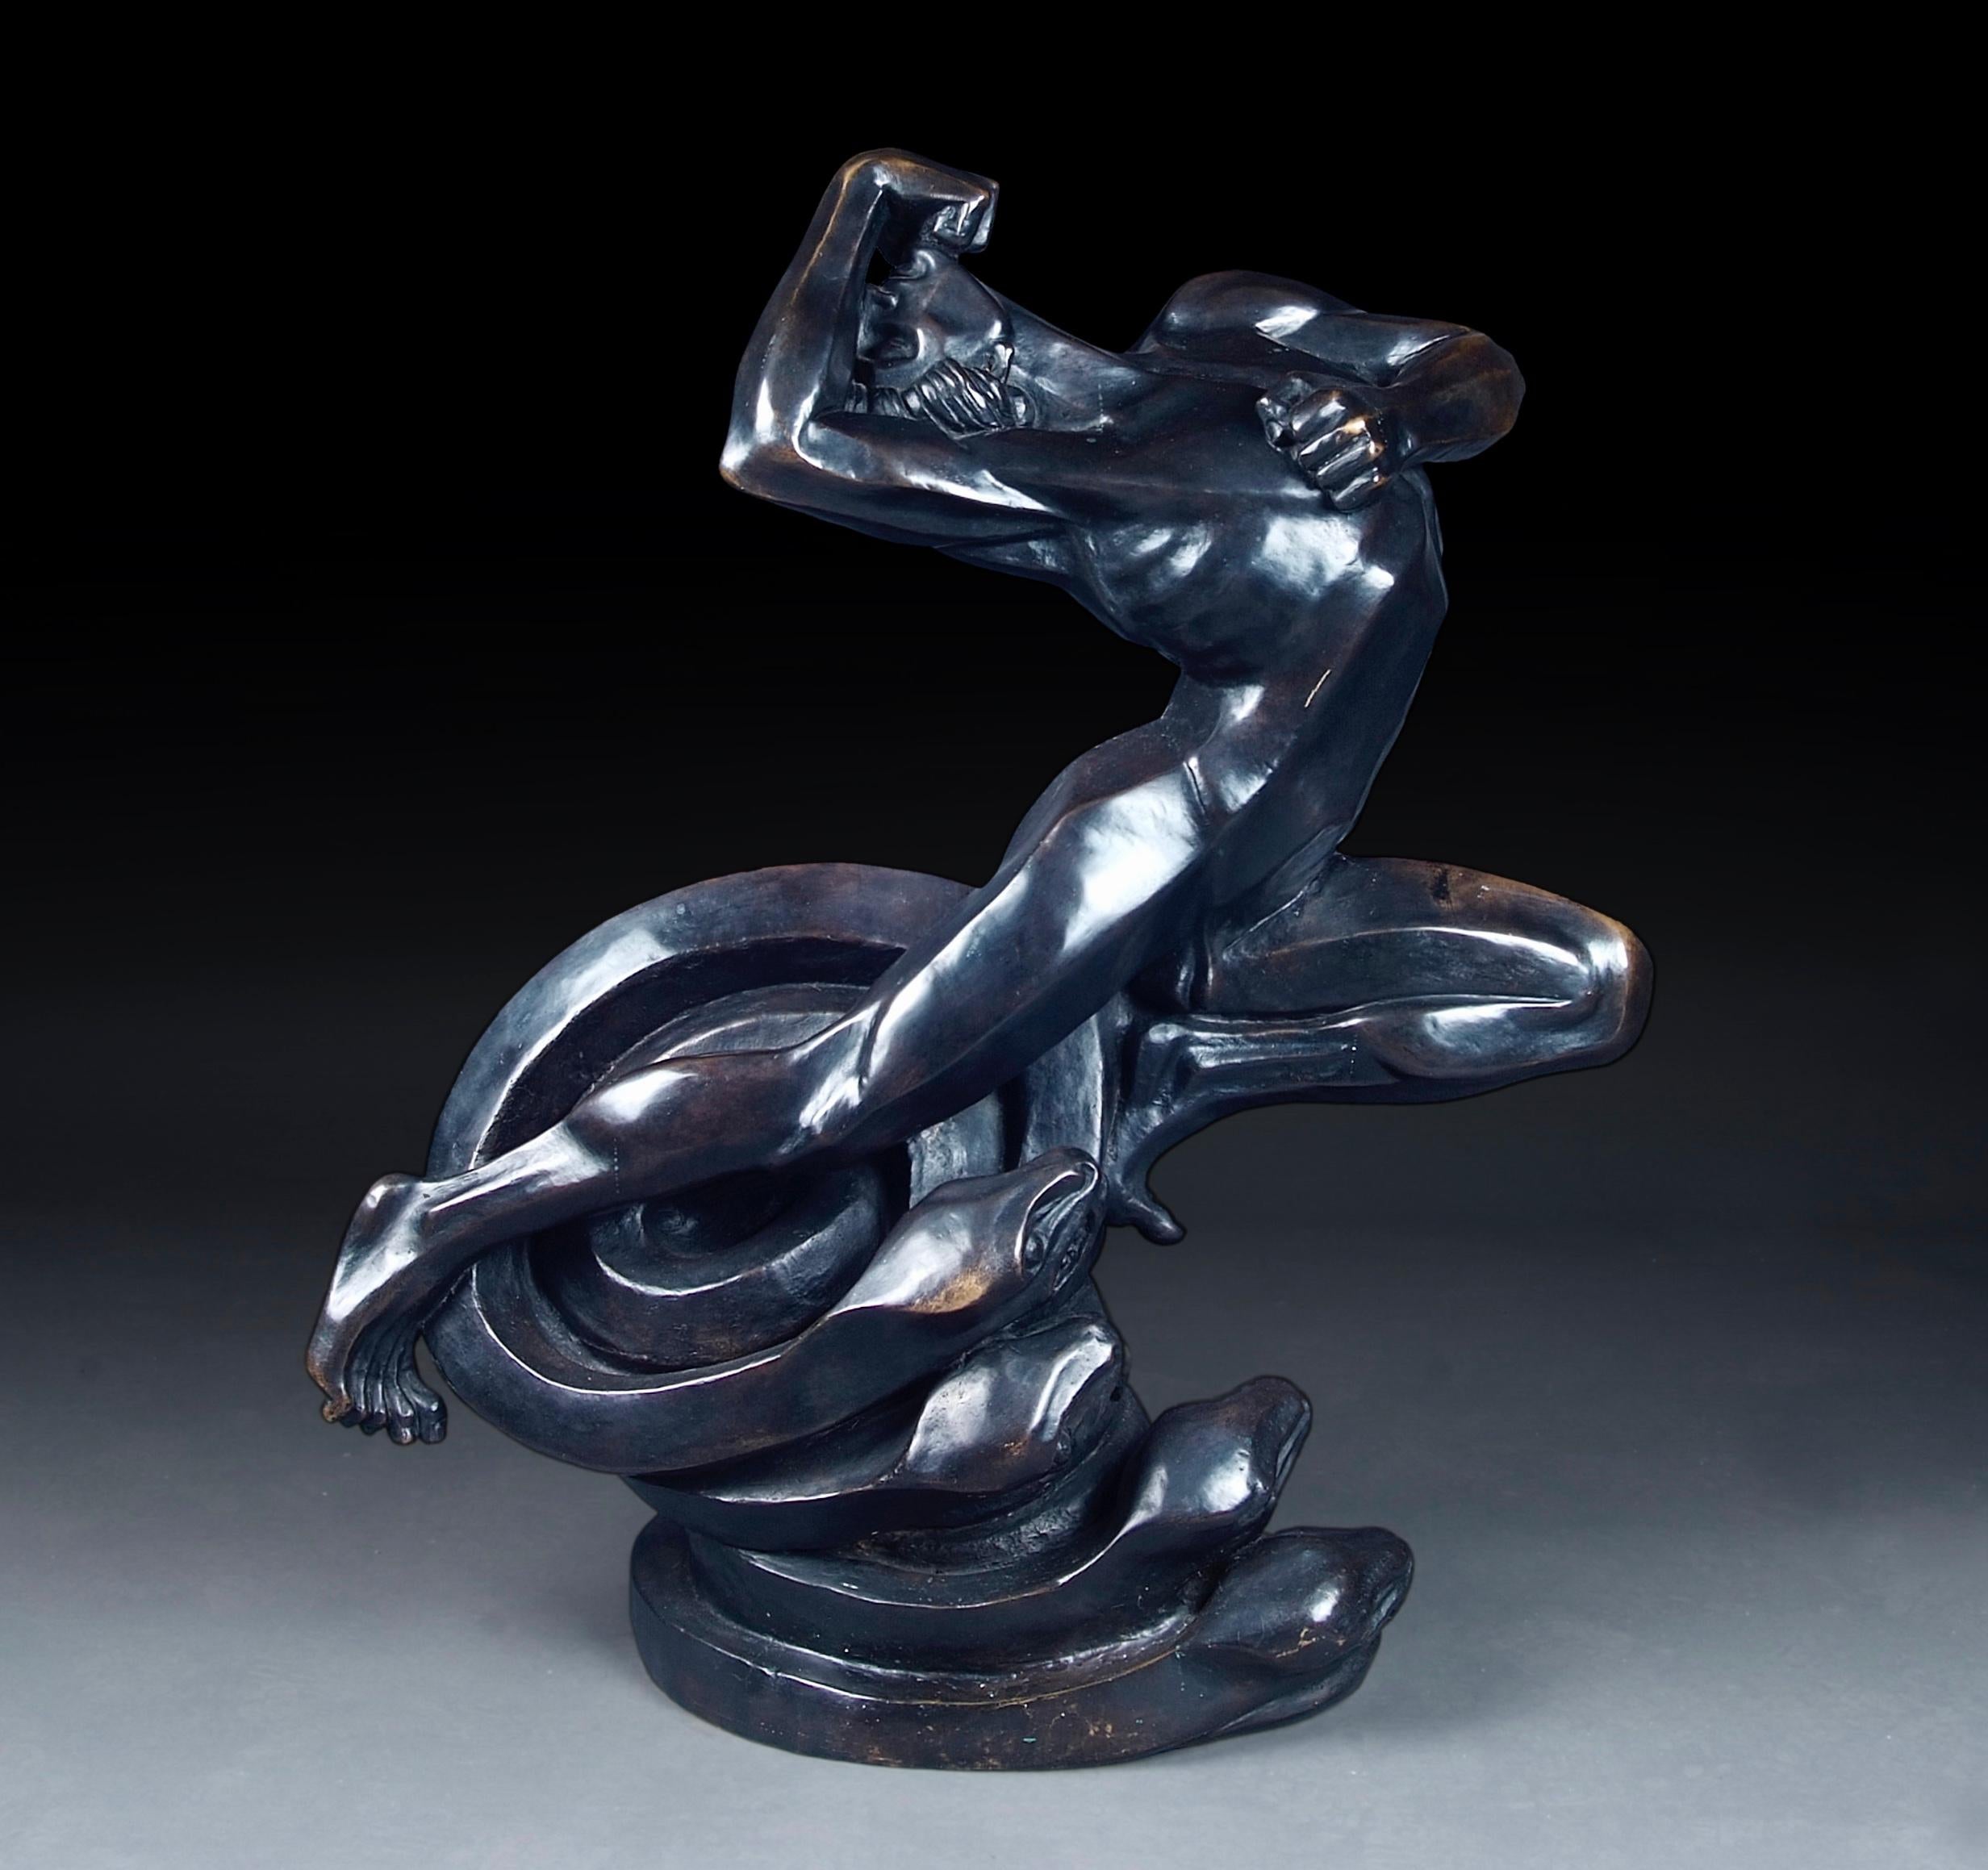 Boleslaw Biegas (1877-1954)-Figural bronze of a naked running athlete astride four coiled serpents, signed and dated 15 Novembre 1917, also stamped Blanchet Fondeur and numbered 2/8